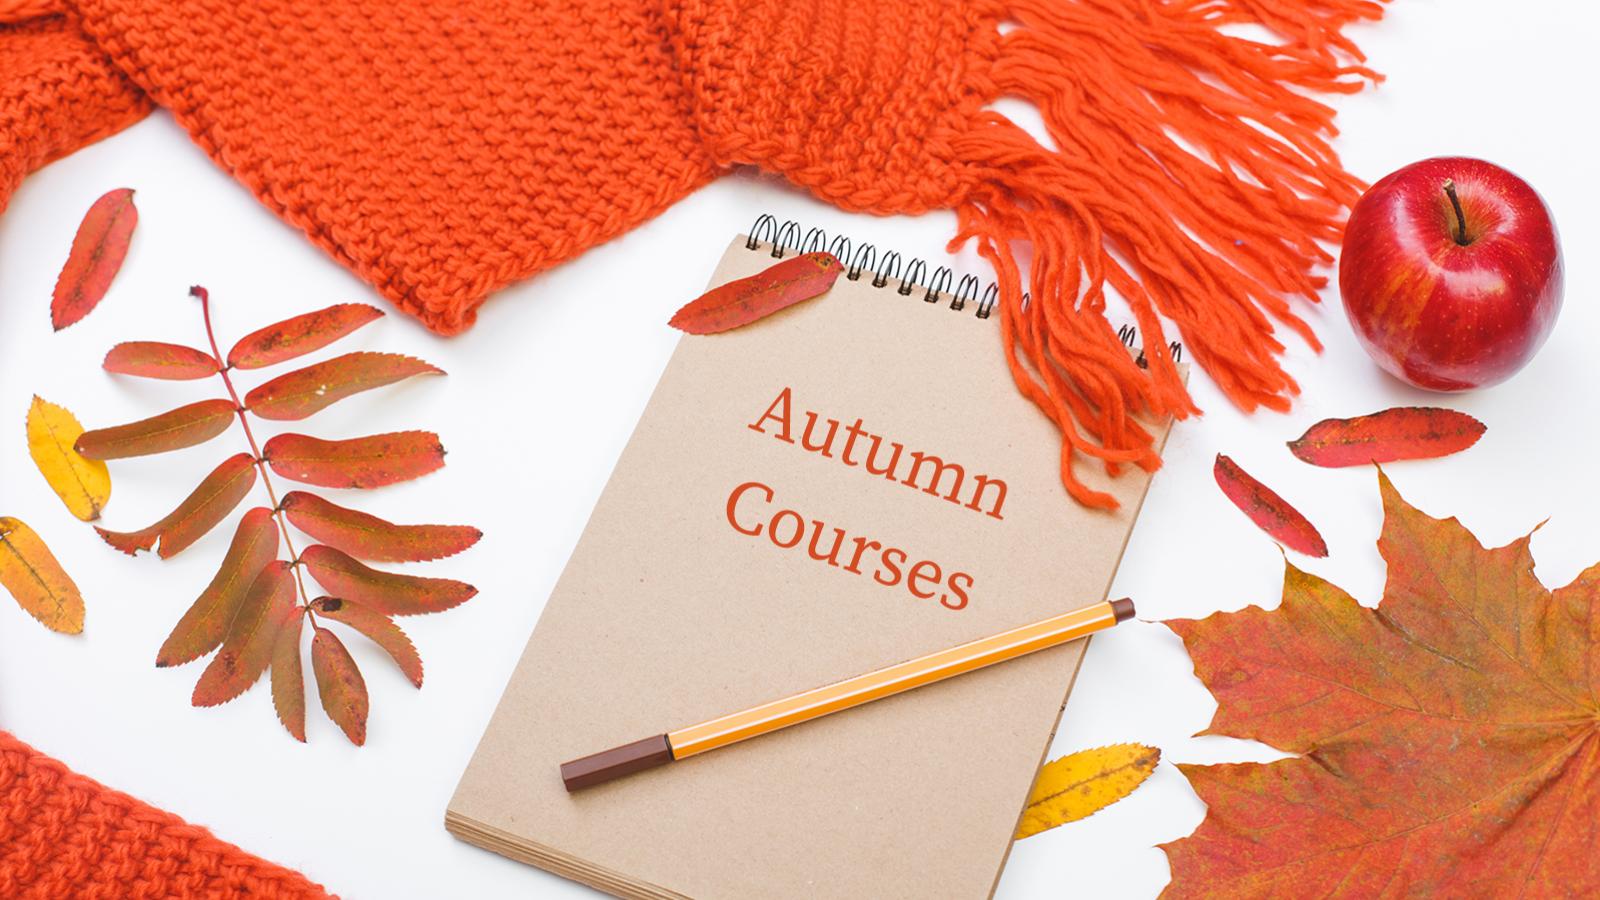 autumn courses written on pad of paper, pencil, leaves, apple and orange knitted scarf